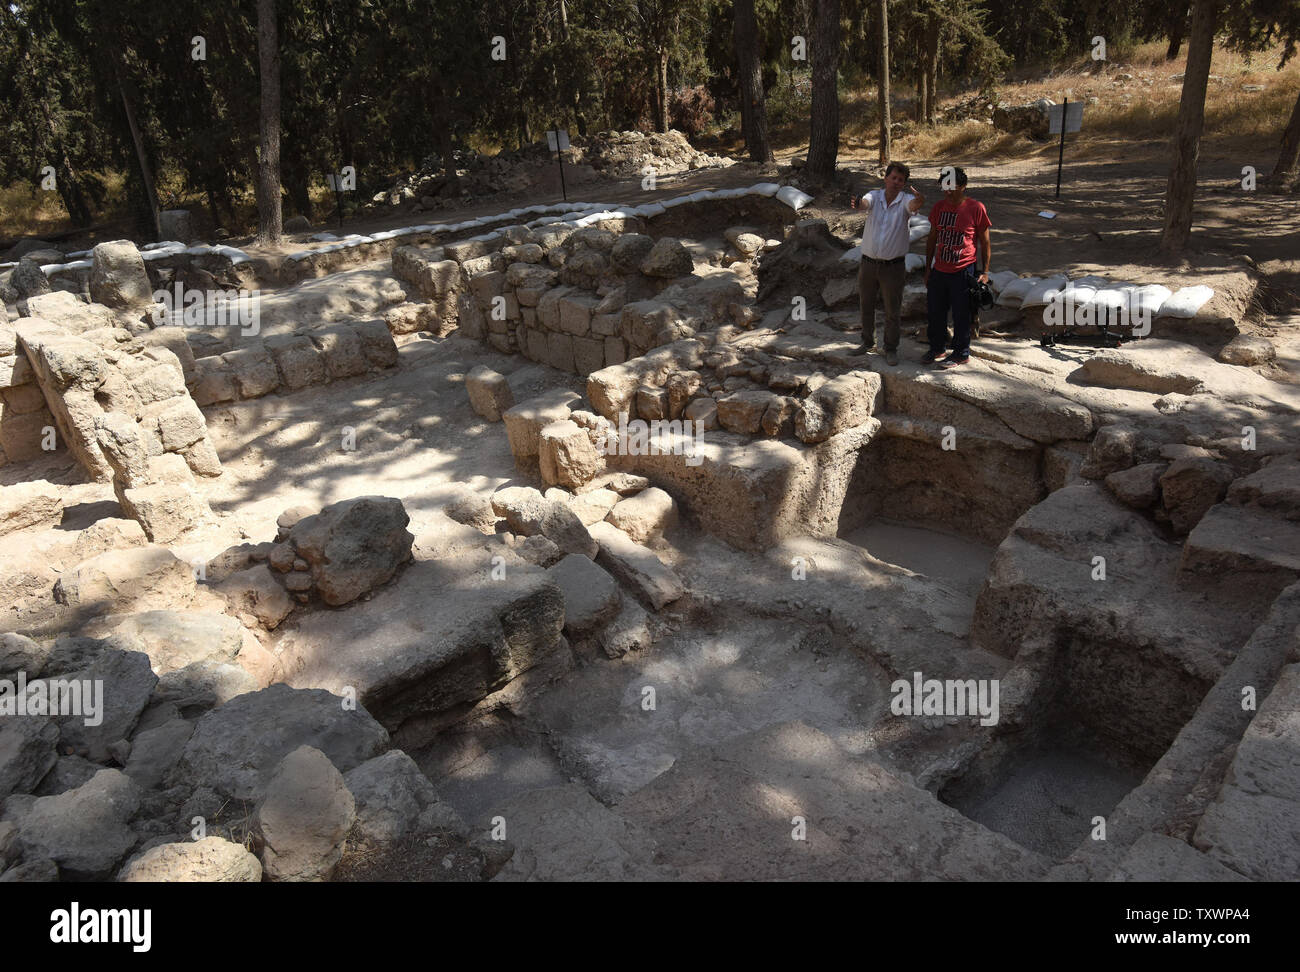 An overview of an archeological site that has revealed a large mausoleum uncovered by the Israel Antiquities Authority while searching for the real location of the Tomb of the Maccabees in Modi'in, Israel, September 21, 2015.  Byzantine Period mosaics adorned with a cross were found in the floor of a burial vault believed to be associated with the Tombs of the Maccabees who were exalted saints in the eyes of early Christianity. The Maccabees led the uprising against Greek rule and were responsible for cleansing the impurity from the Second Temple. As yet, archaeological evidence is not current Stock Photo